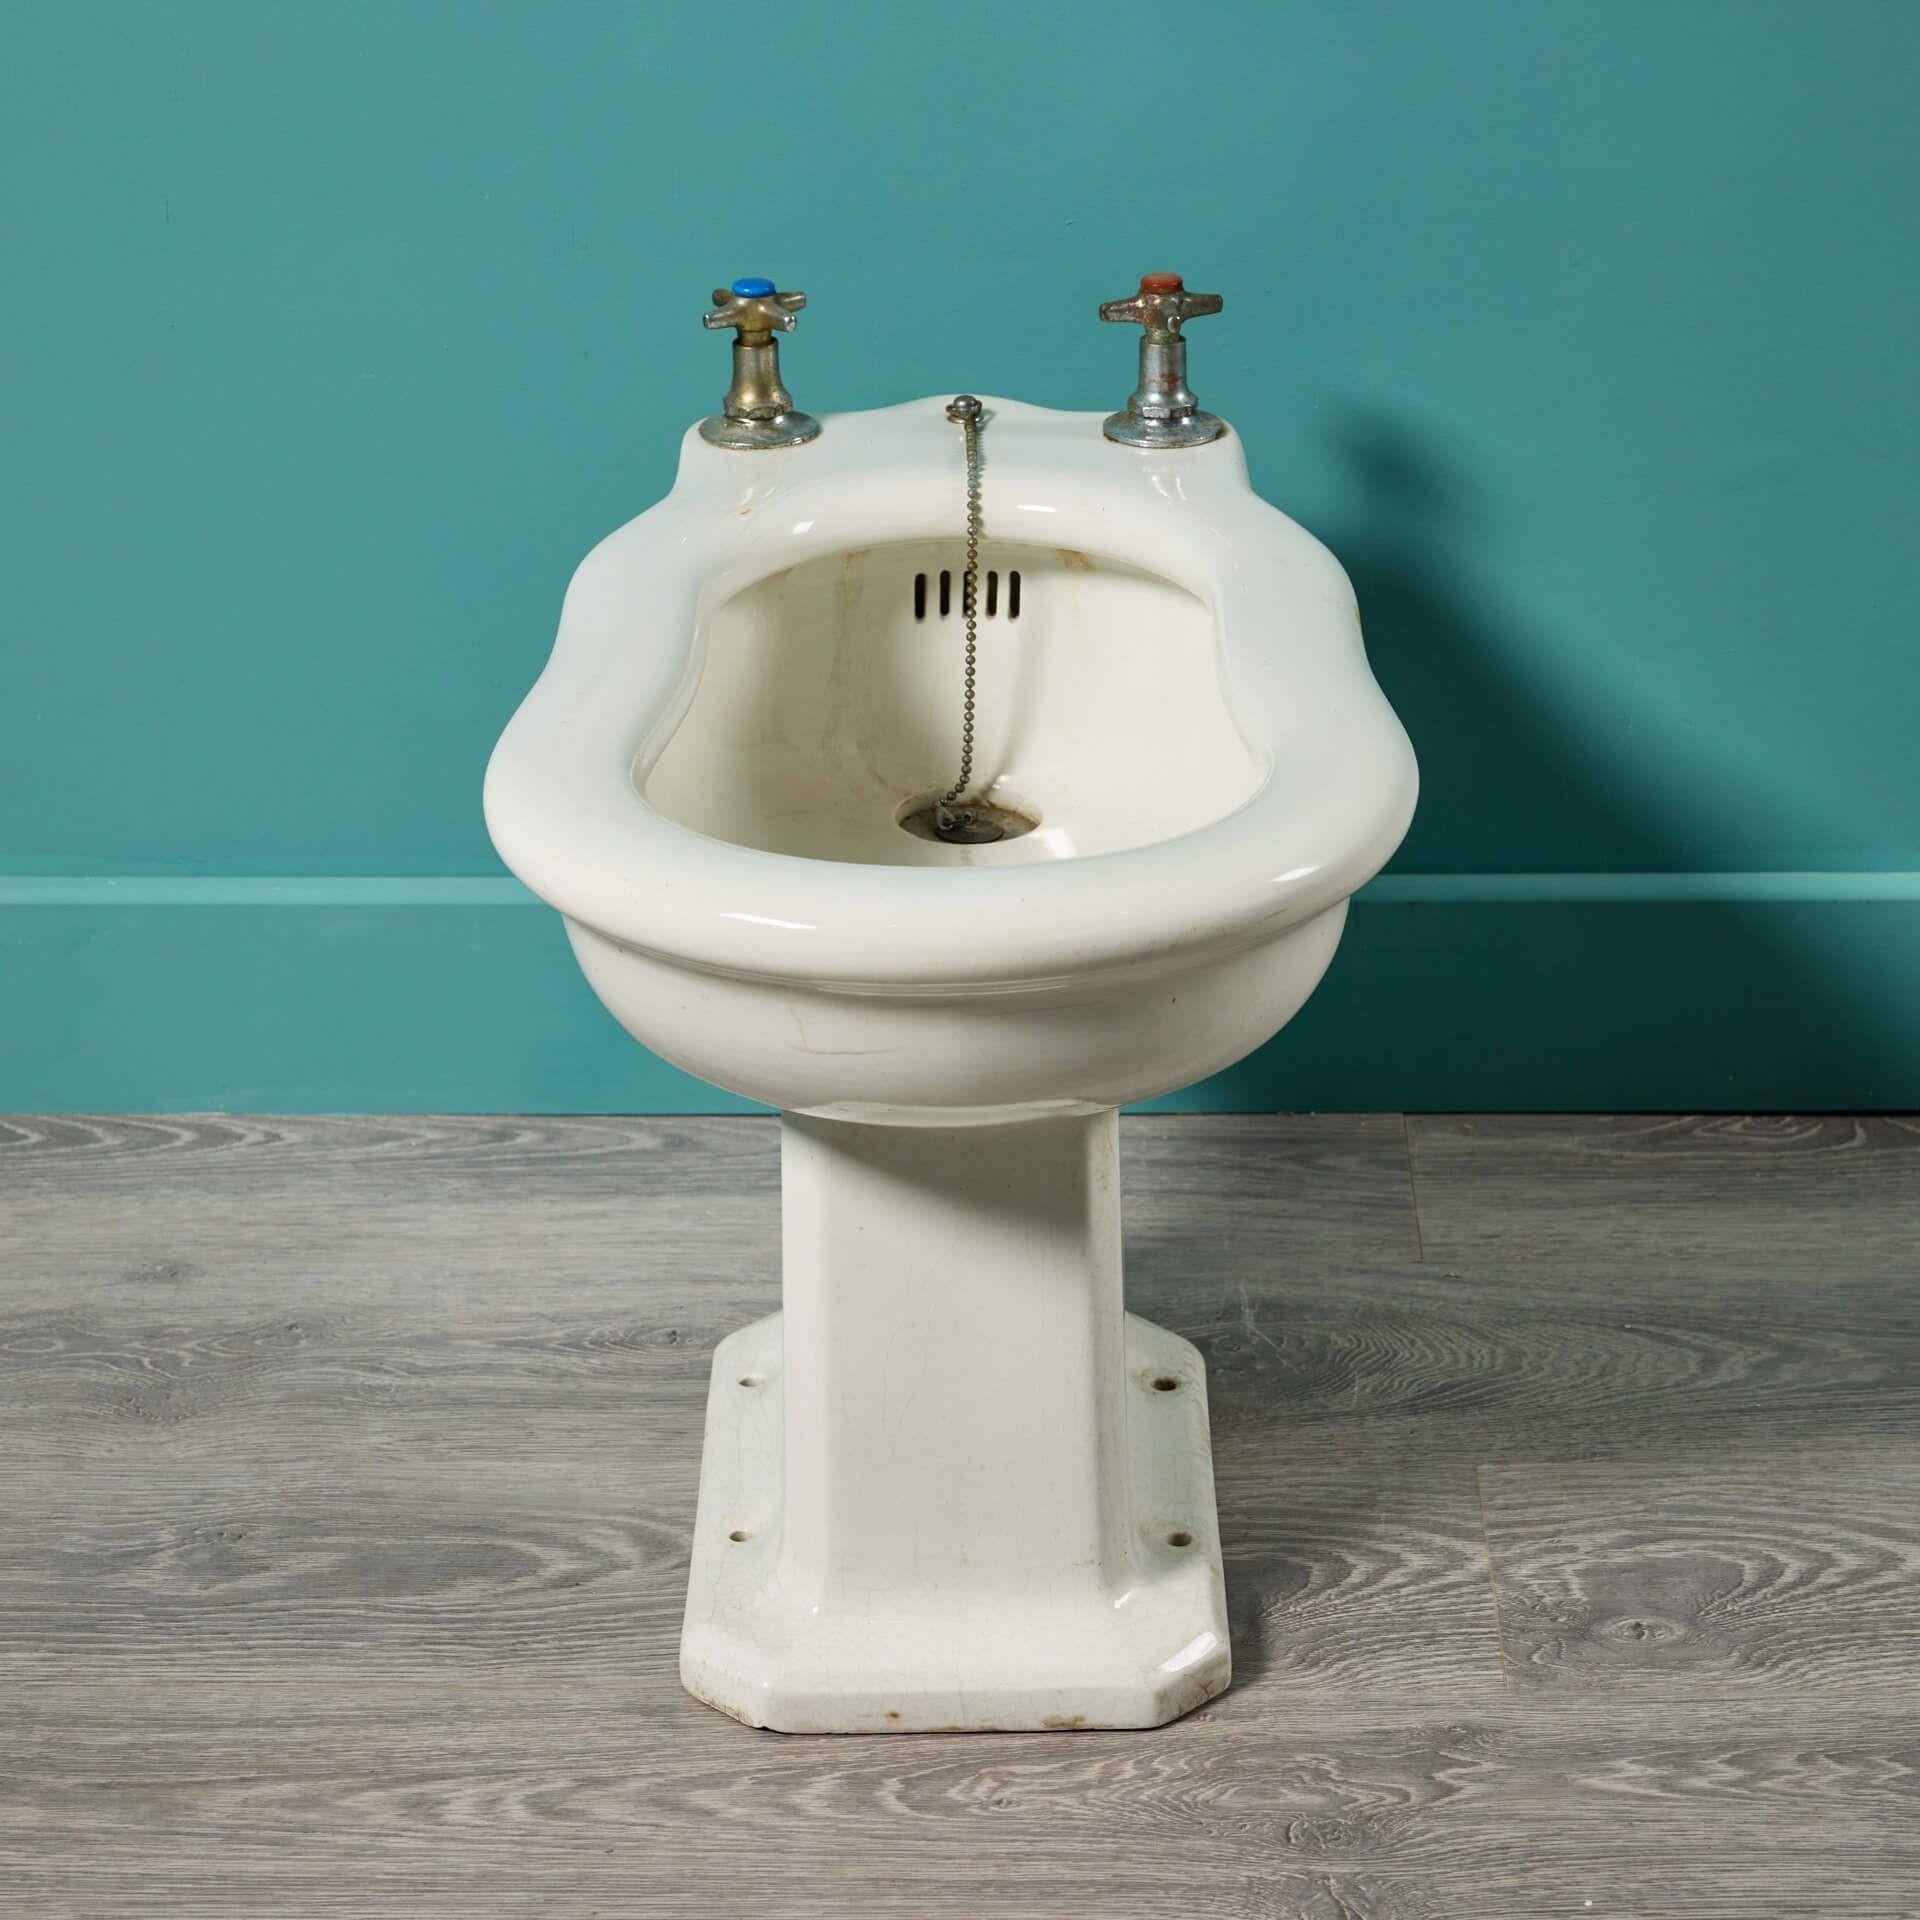 A vintage art deco style porcelain bidet made by De Sphinx. This early 20th century piece has an even crazed vintage look, which would make for a stylish addition to a bathroom in a contemporary or period property.

De Sphinx

De Sphinx, more